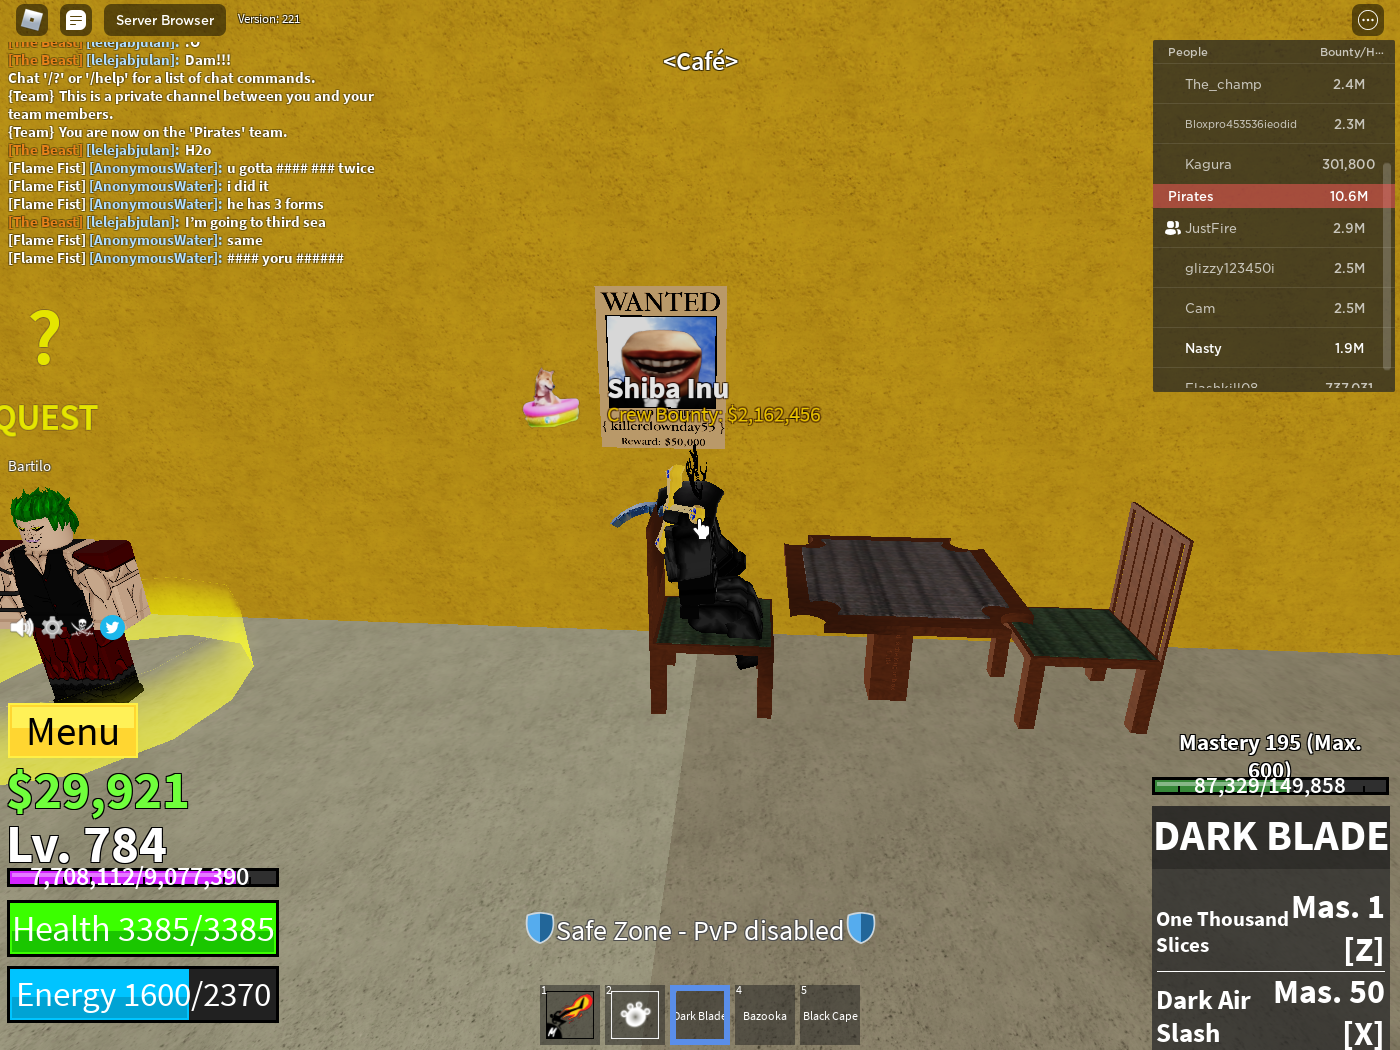 Ghost, Trade Roblox Blox Fruits Items